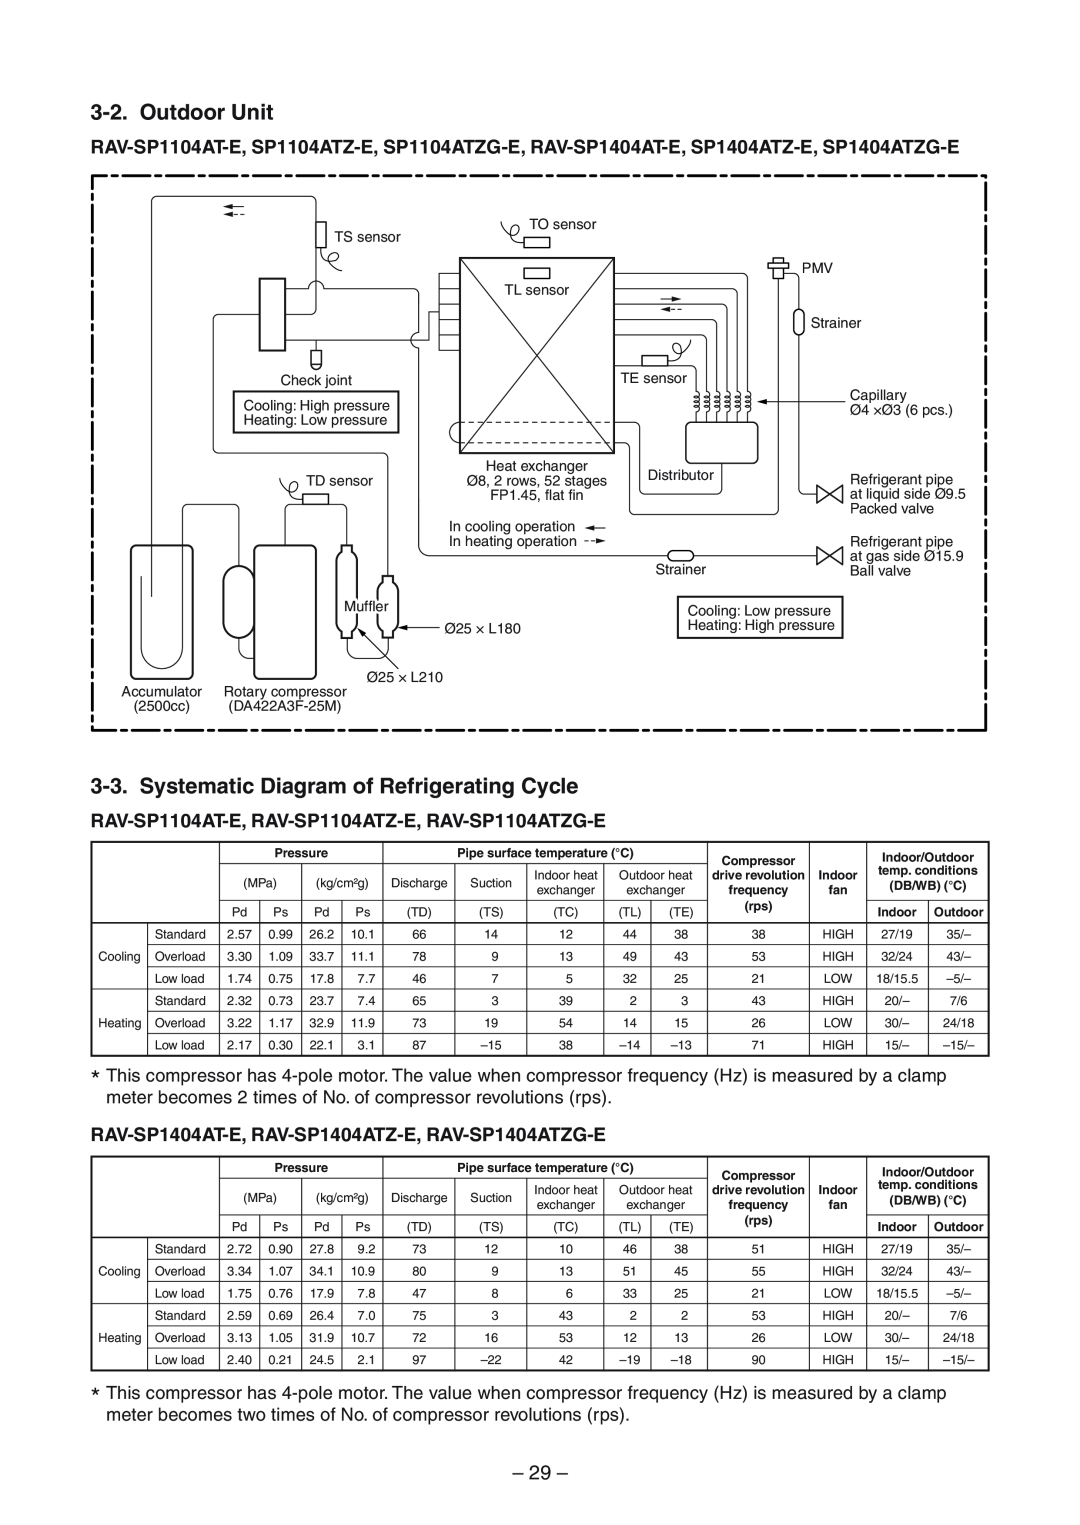 Toshiba RAV-SP1104AT-E, RAV-SM1404UT-E, RAV-SM1104UT-E Outdoor Unit, Systematic Diagram of Refrigerating Cycle, 29 